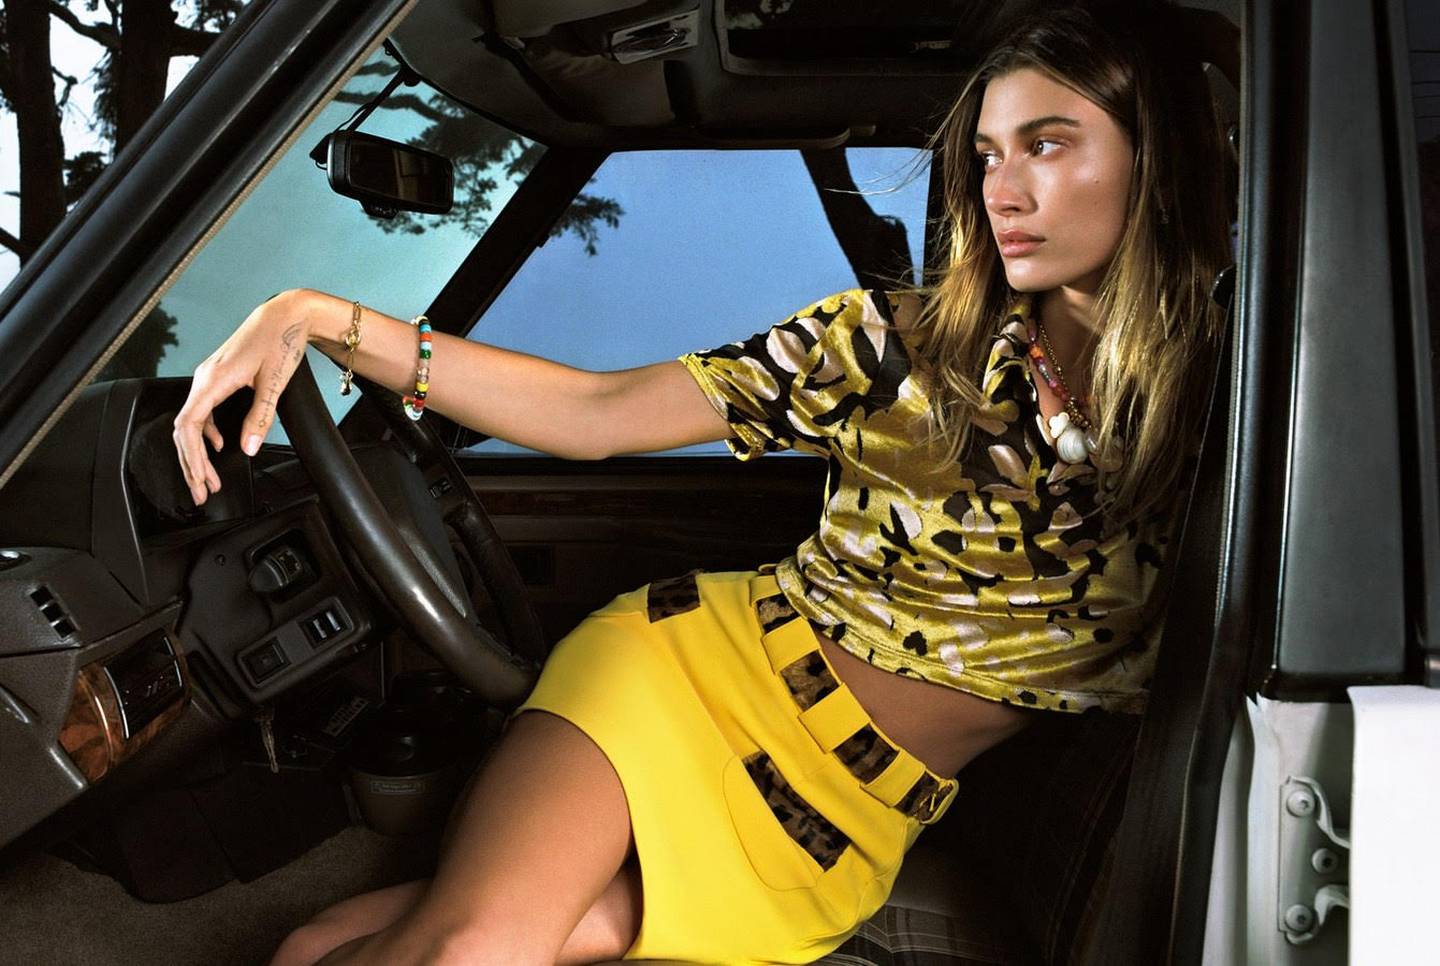 Hugo Comte has shot for top brands and magazines, including Hailey Bieber for American Vogue.